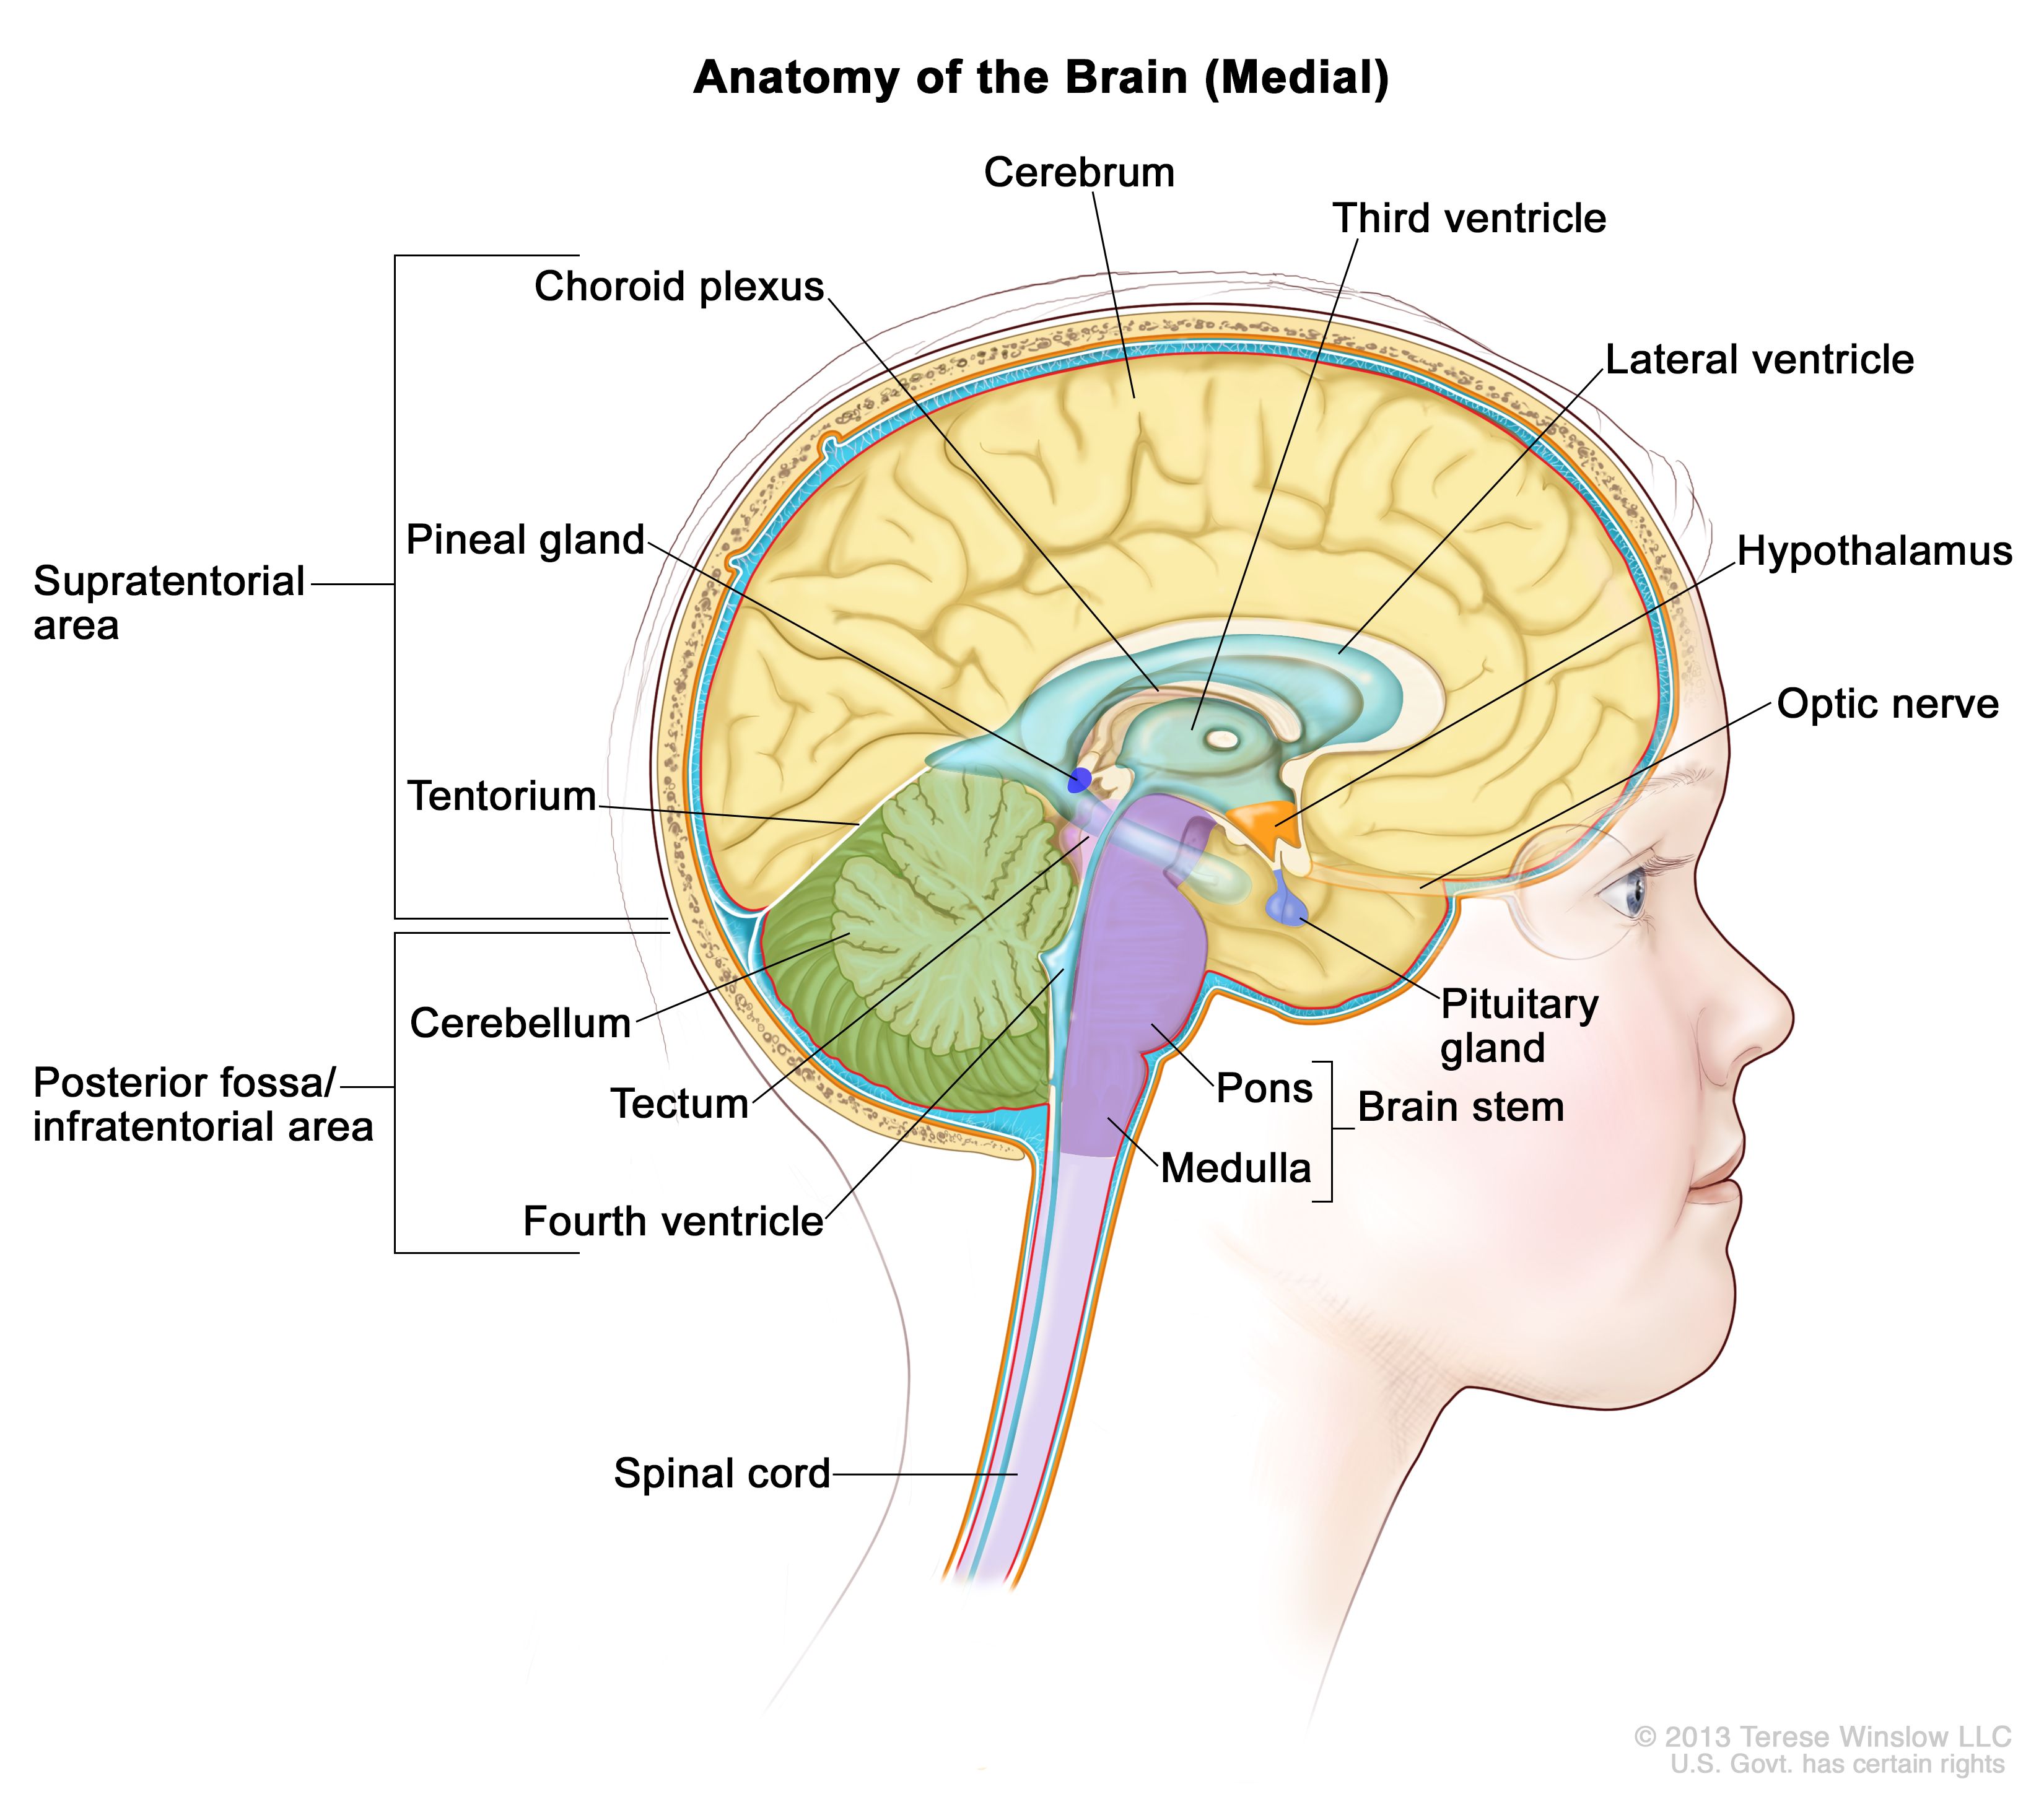 Drawing of the inside of the brain showing the supratentorial area (the upper part of the brain) and the posterior fossa/infratentorial area (the lower back part of the brain). The supratentorial area contains the cerebrum, lateral ventricle, third ventricle, choroid plexus, hypothalamus, pineal gland, pituitary gland, and optic nerve. The posterior fossa/infratentorial area contains the cerebellum, tectum, fourth ventricle, and brain stem (pons and medulla). The tentorium and spinal cord are also shown.